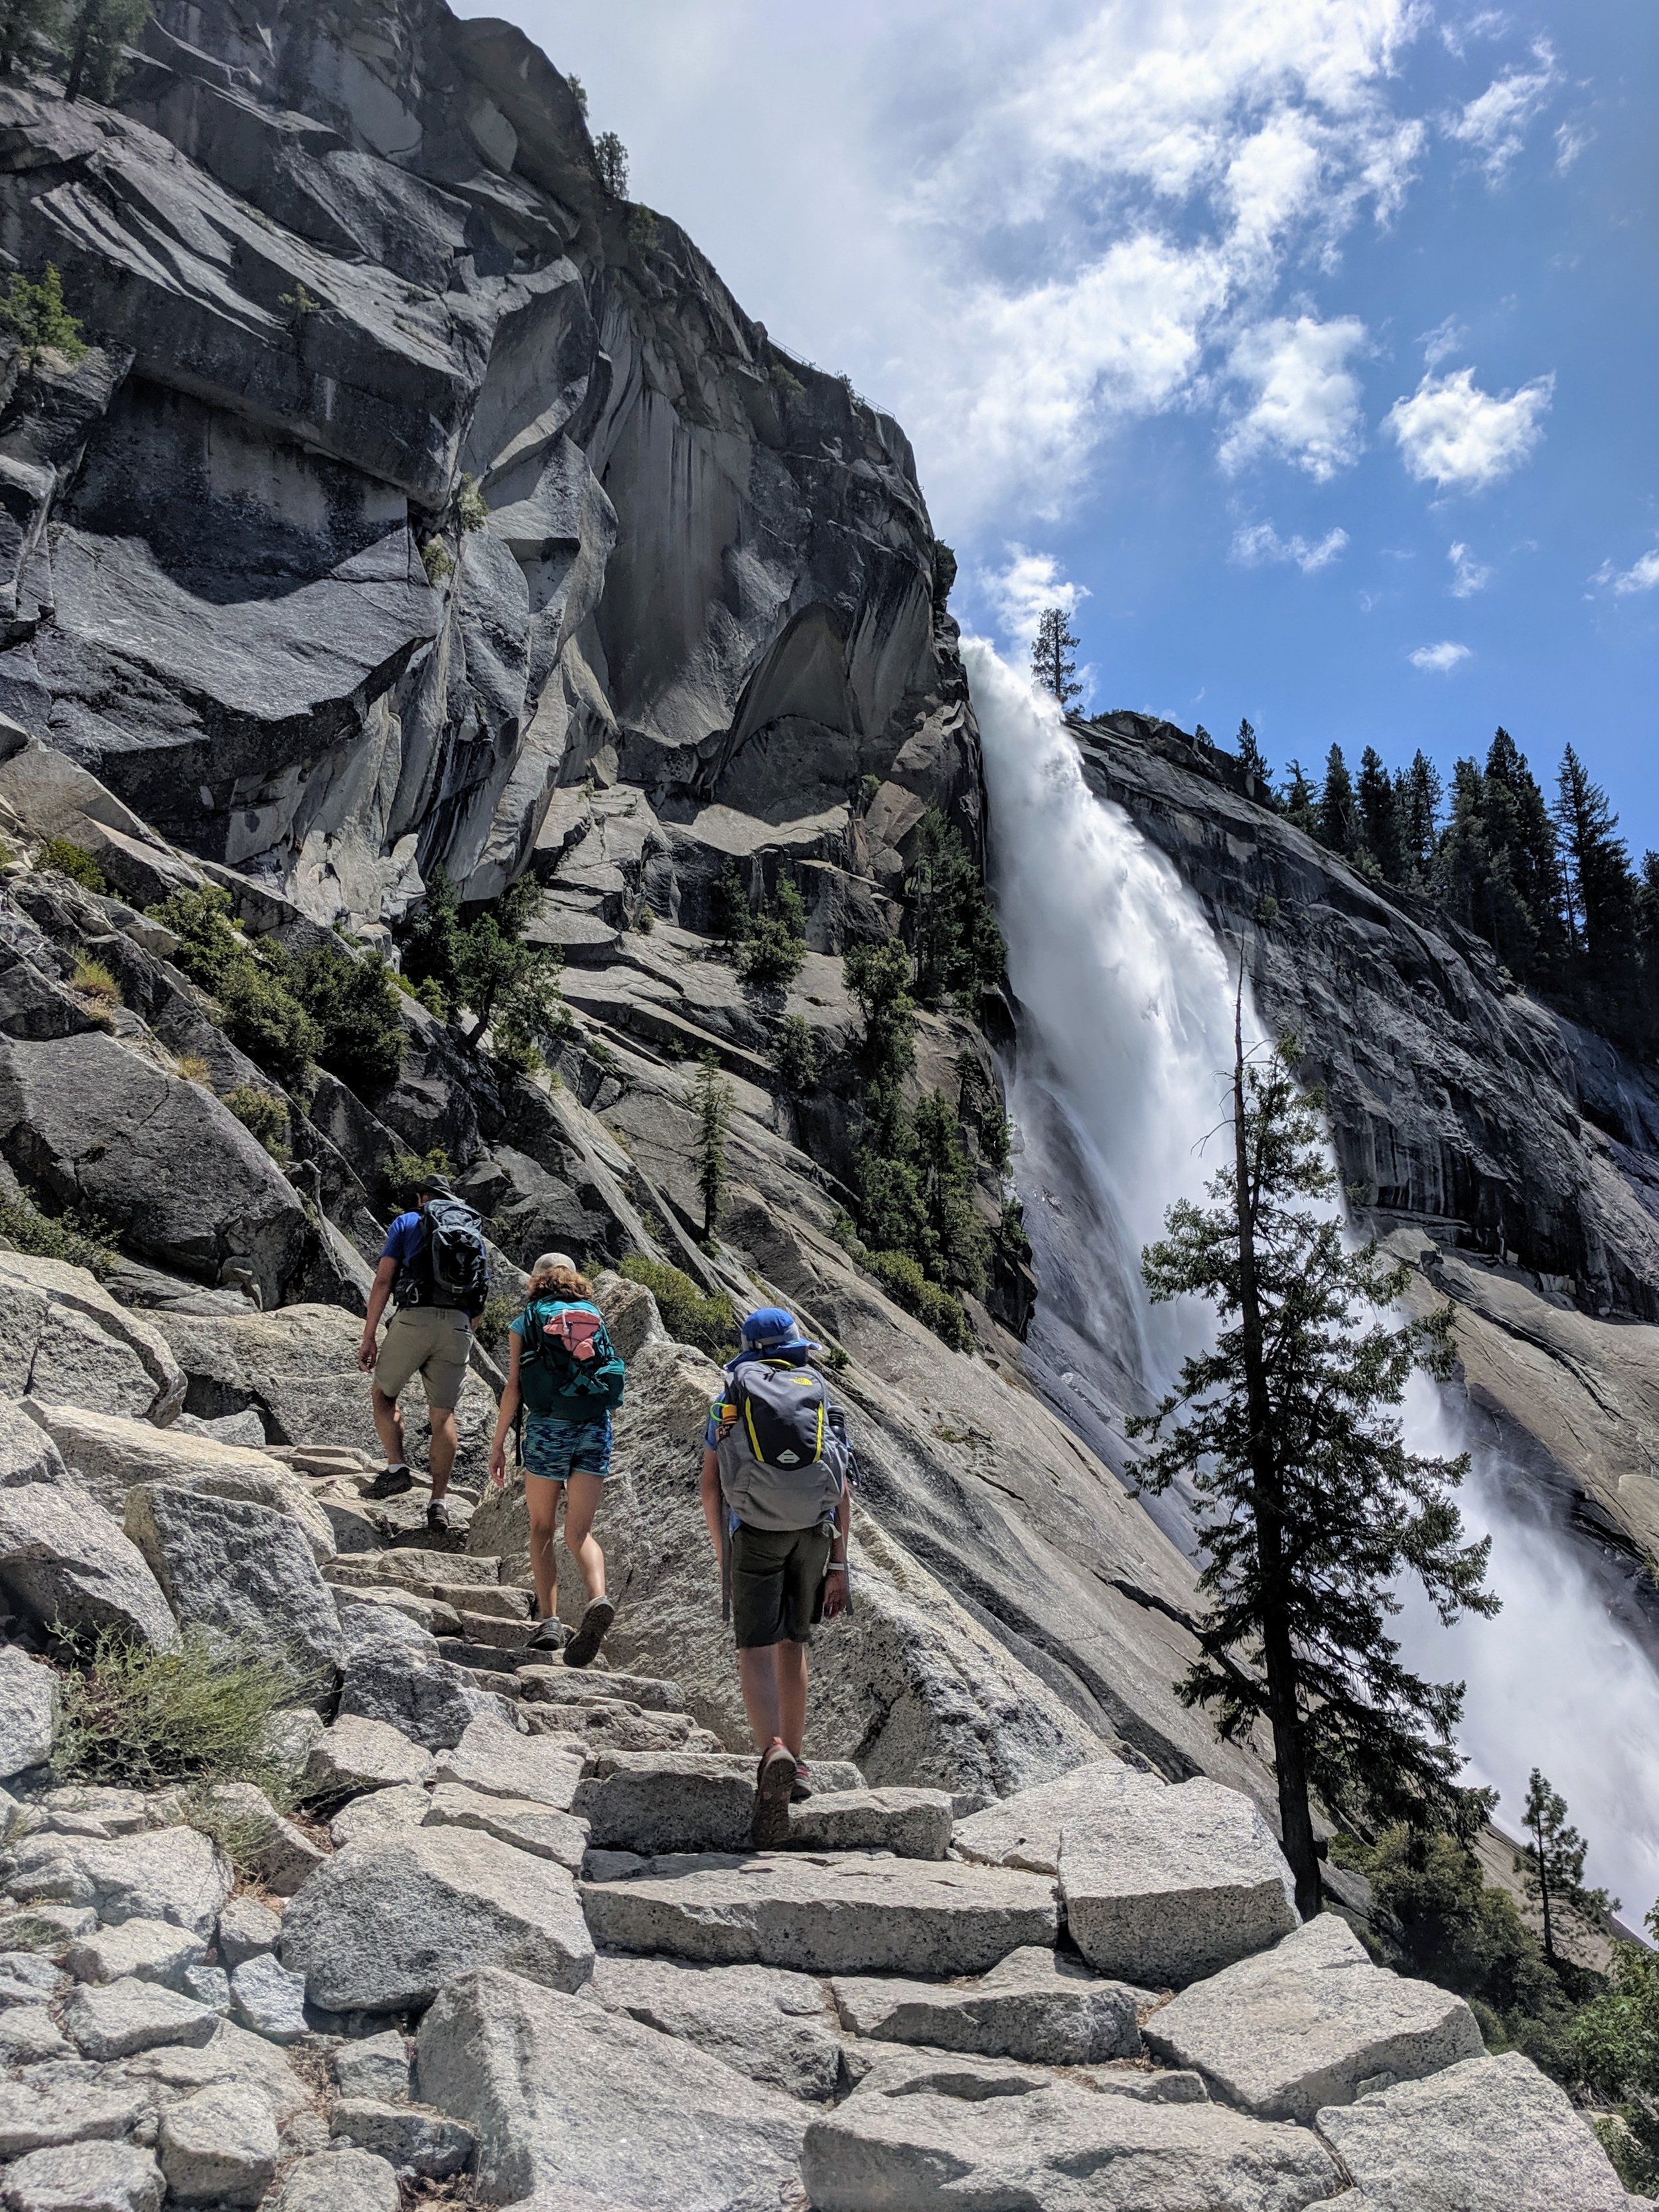  Nevada Falls as seen from Mist Trail in Yosemite. 